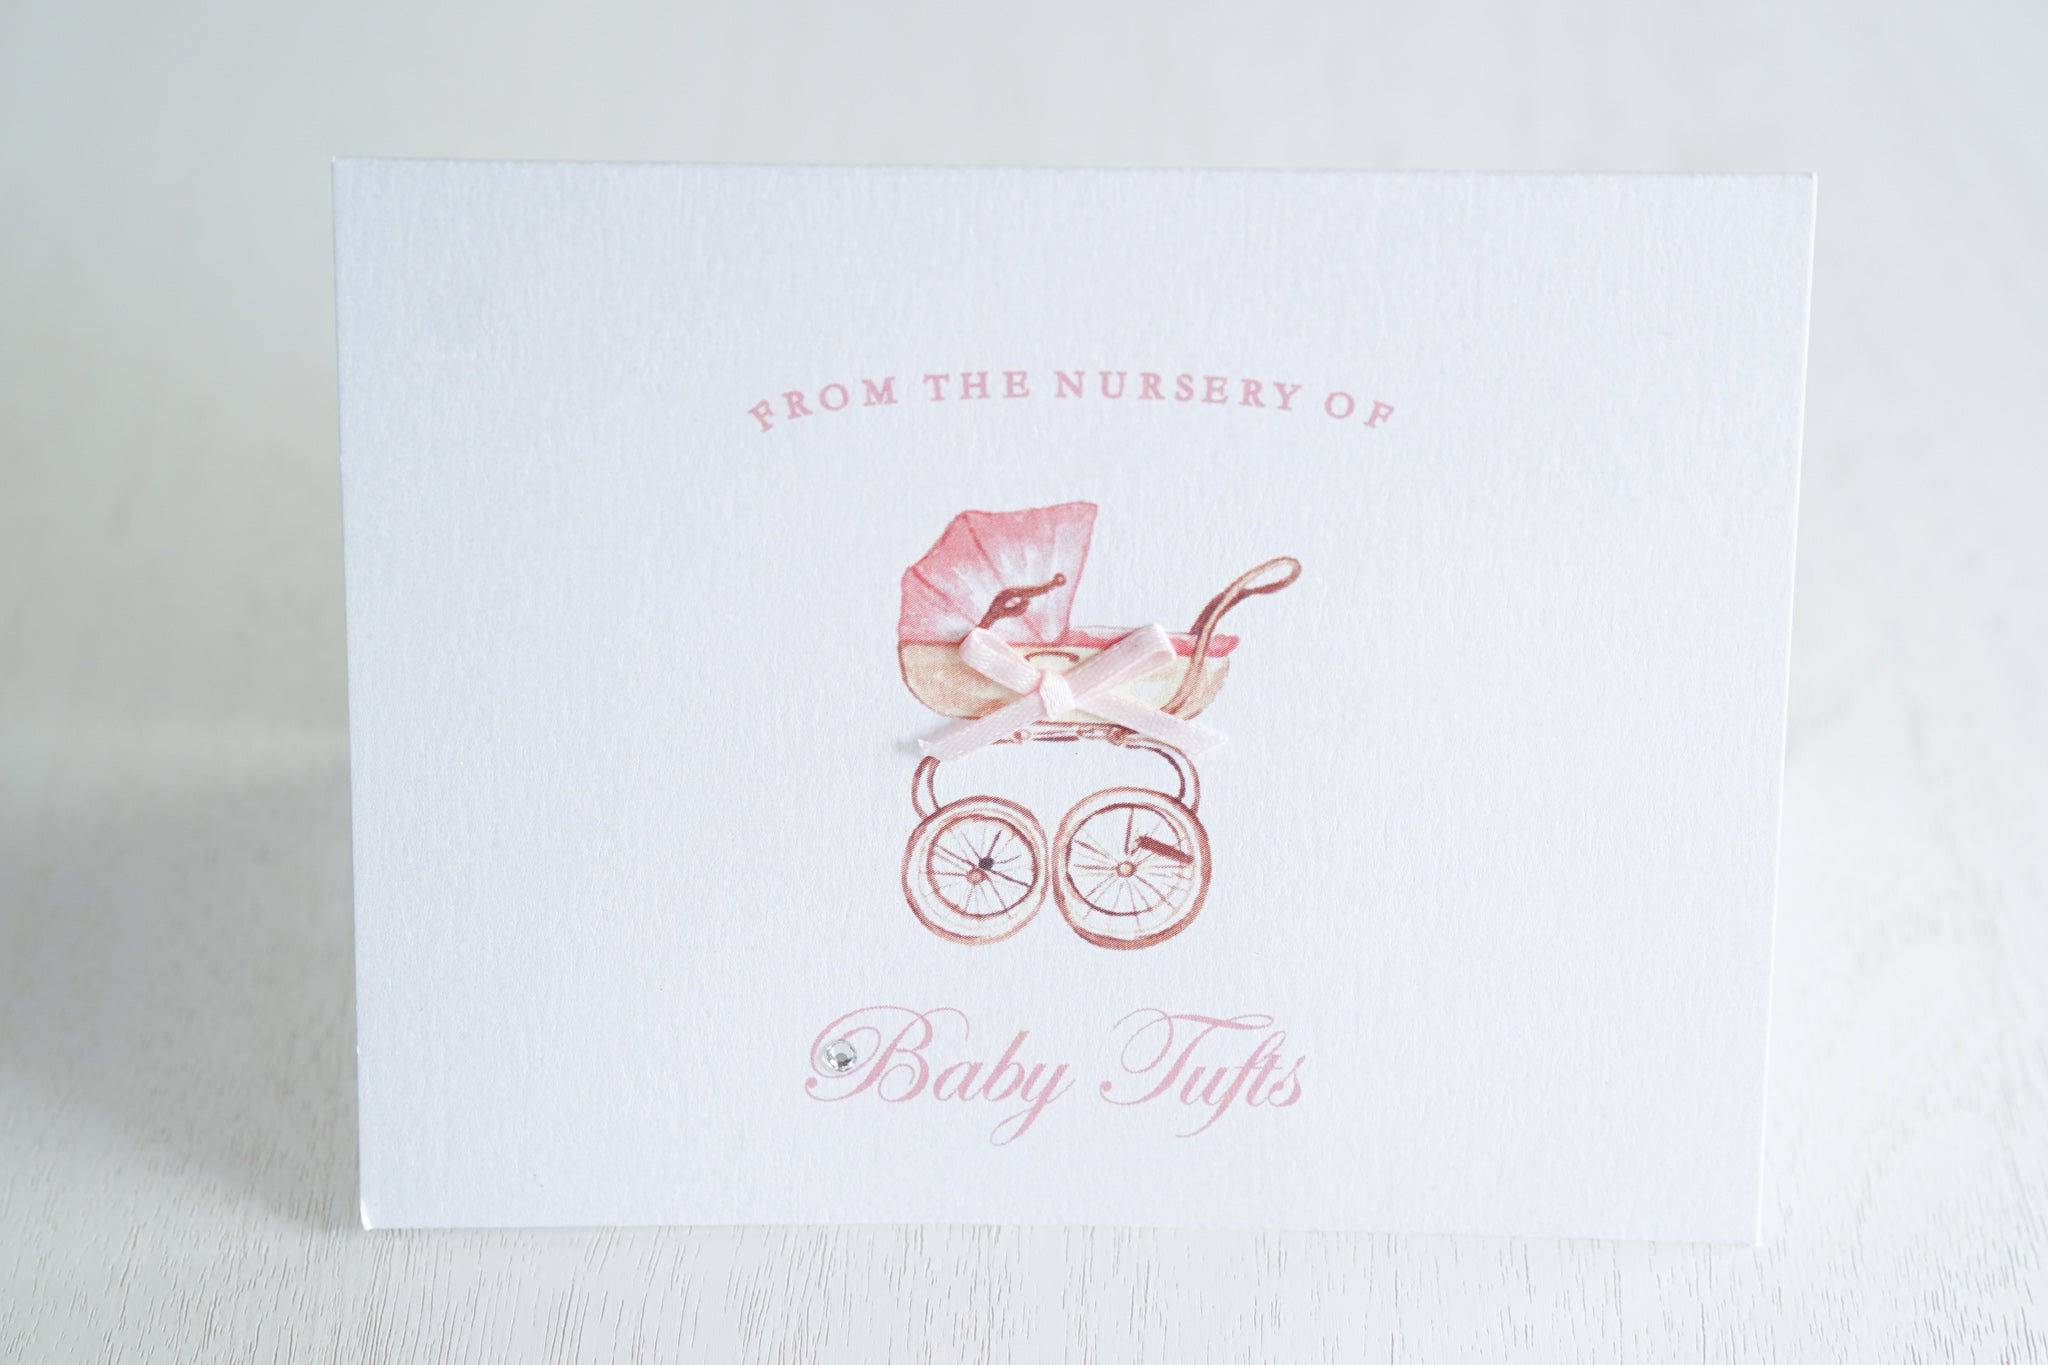 alt=“Sweet baby thank you card features a white pearlescent shimmer card stock, a pink pram with a rich pink satin ribbon bow and a jewel detail”